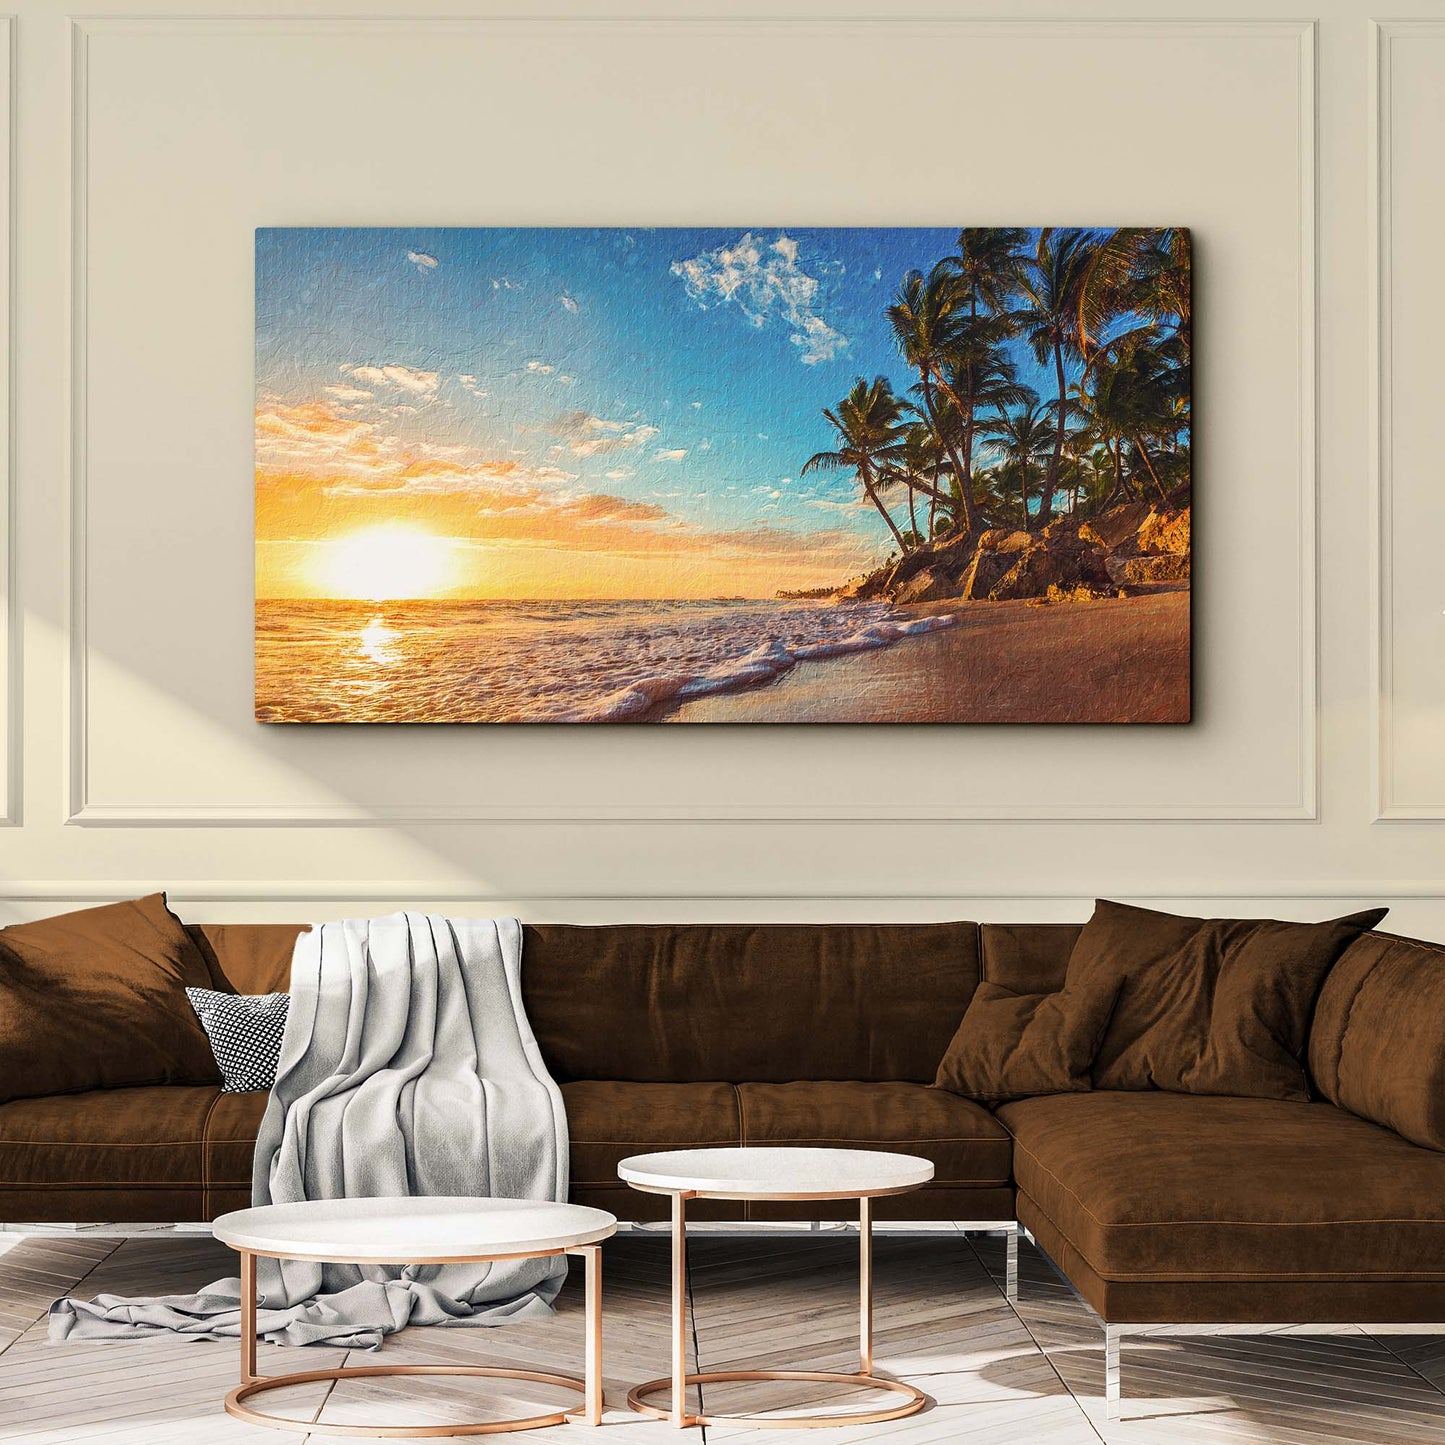 Tropical Beach Sunset Canvas Wall Art Style 2 - Image by Tailored Canvases